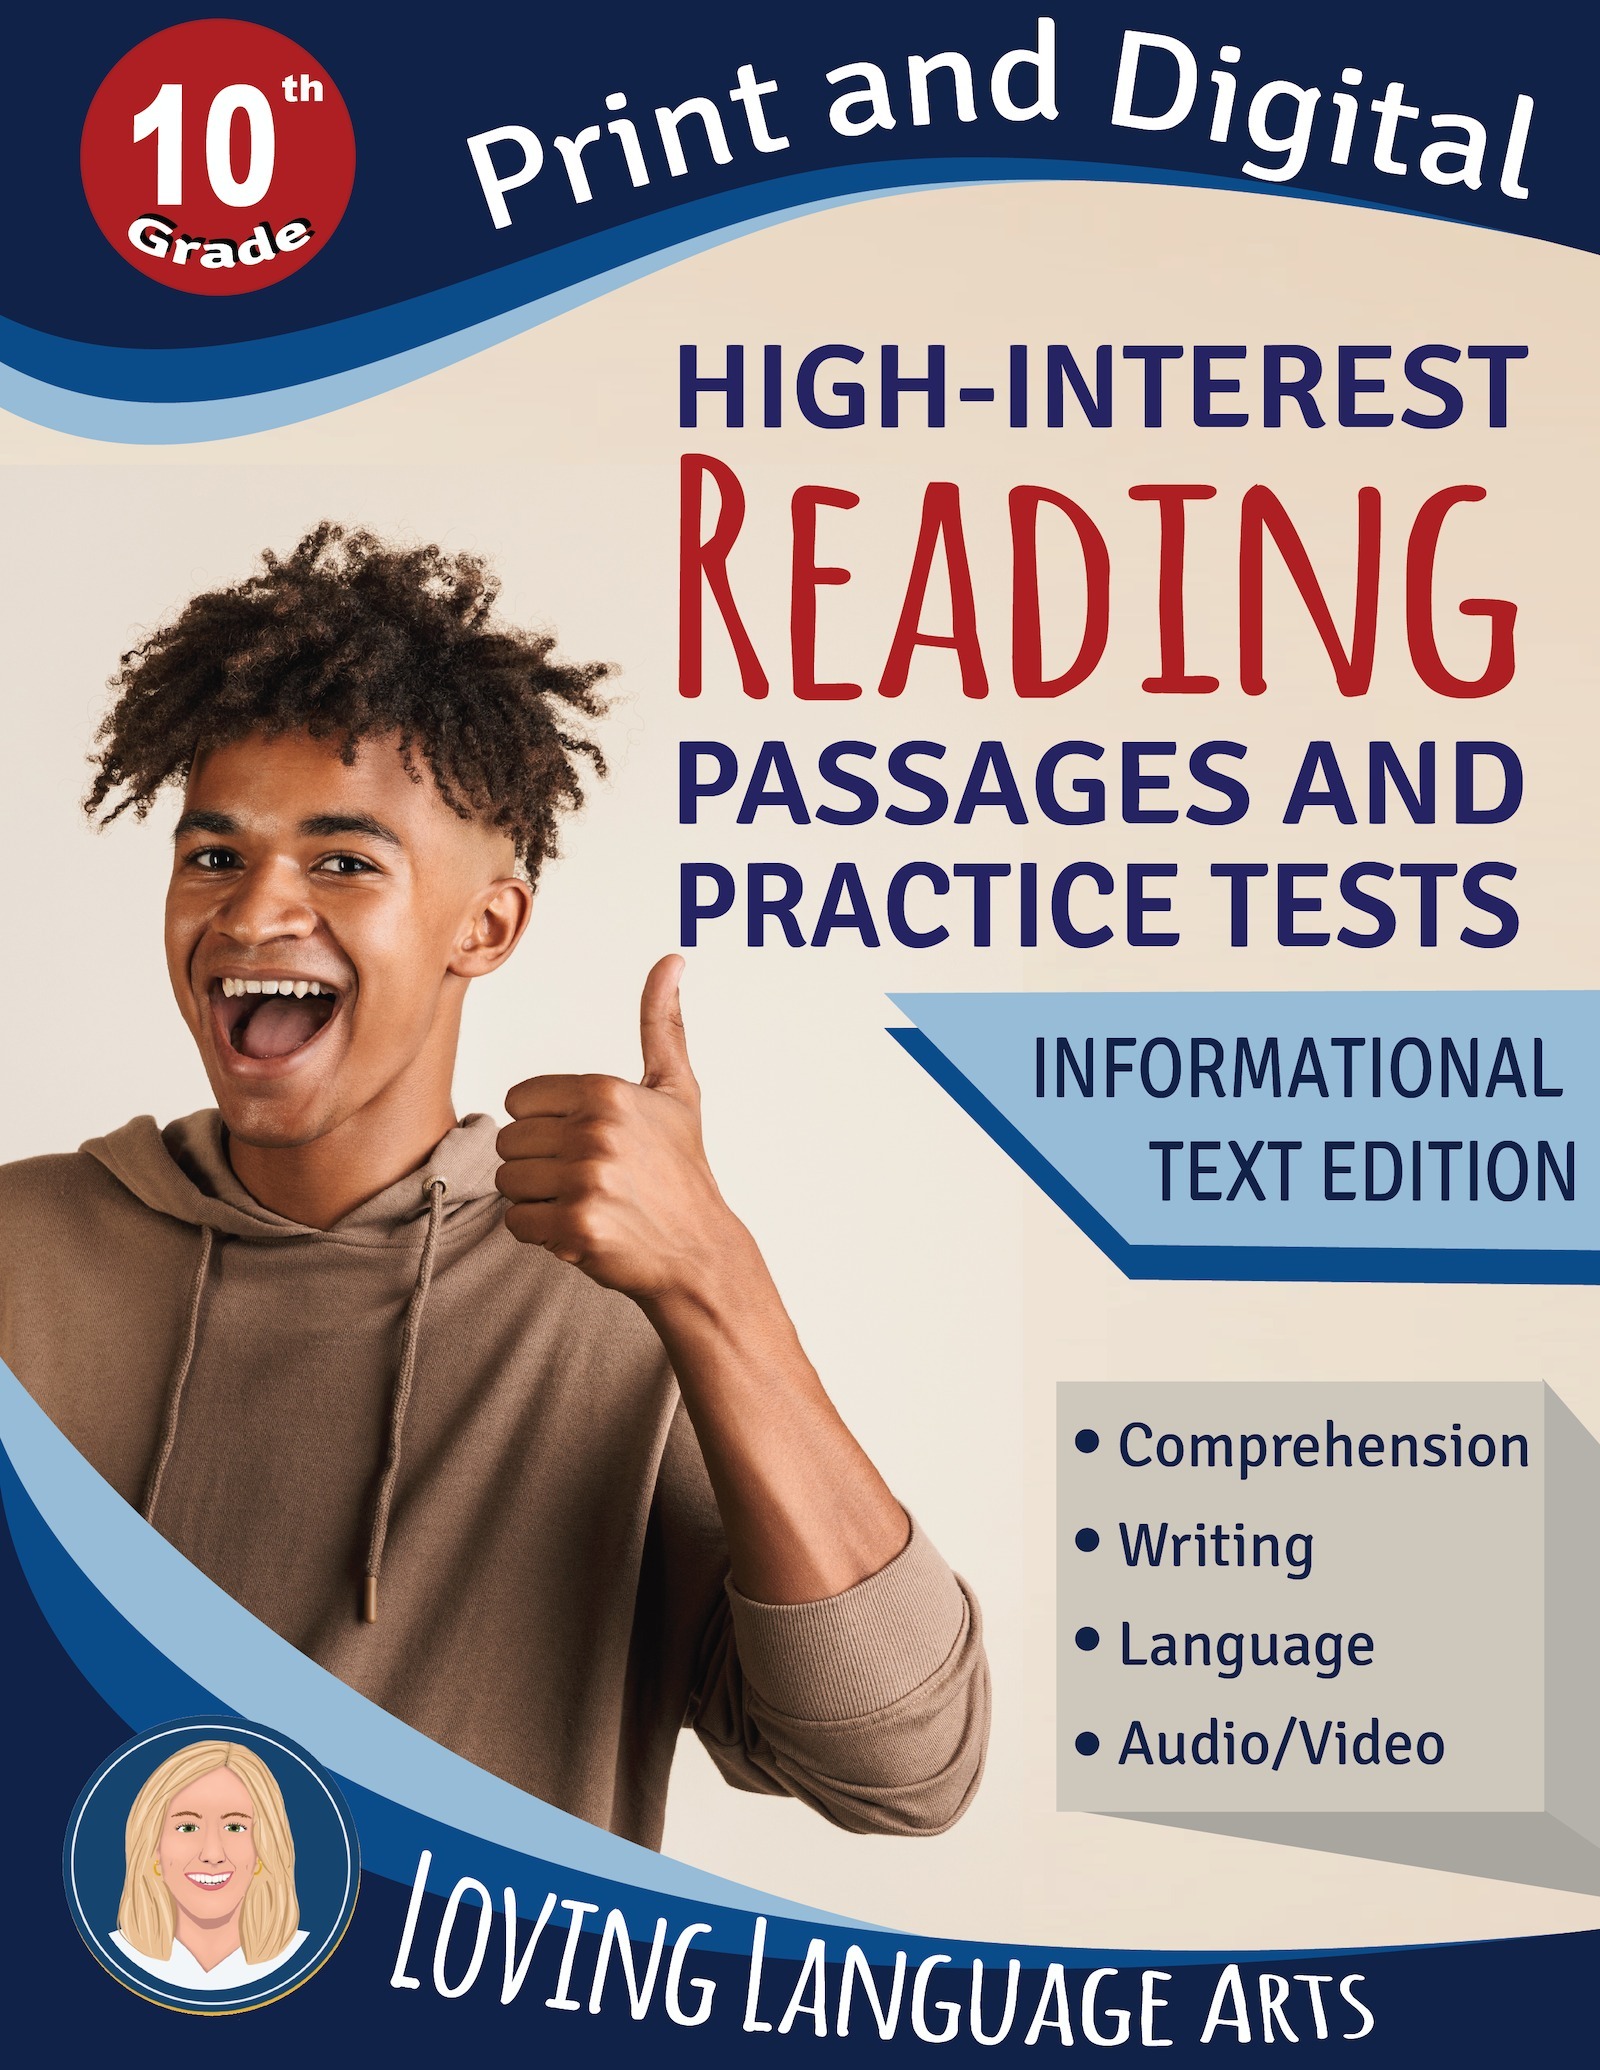 10th grade language arts workbook - High-interest passages and practice tests.